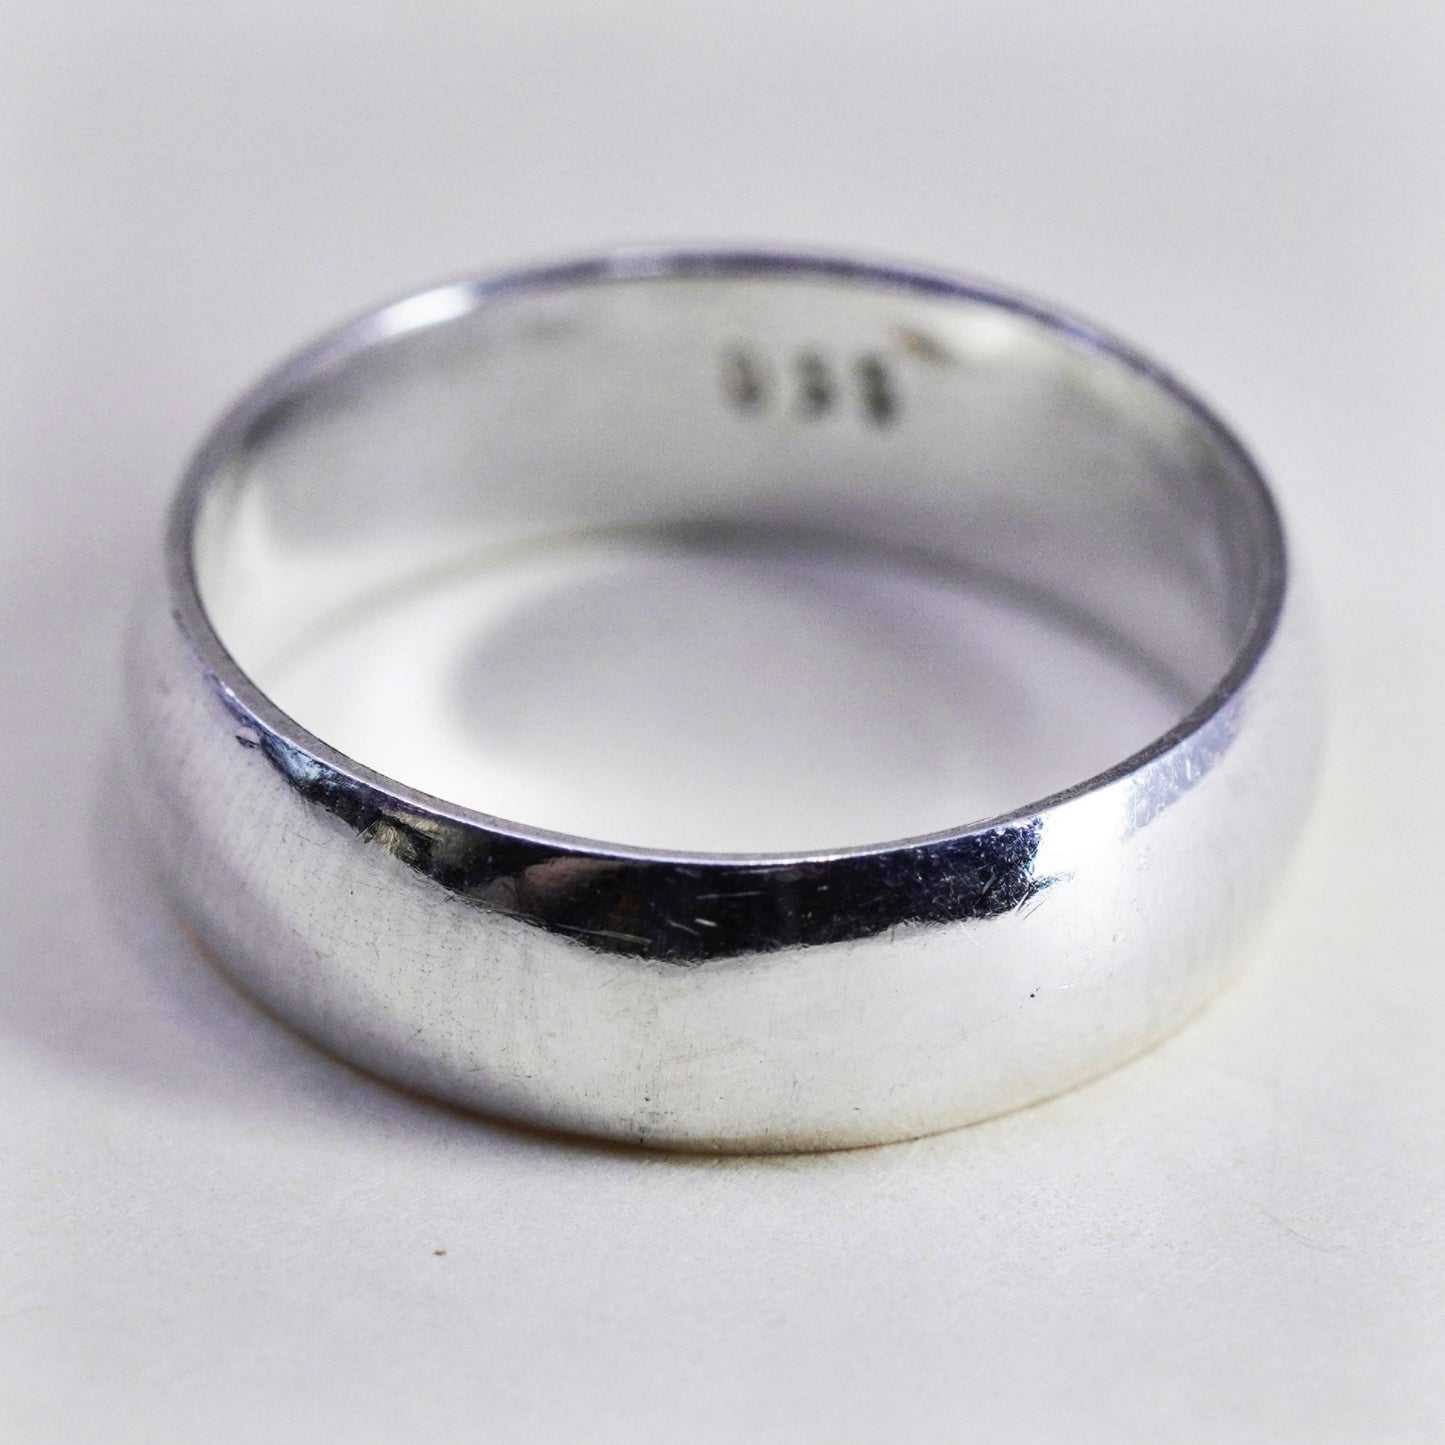 Size 6.75 Vintage sterling silver handmade ring, 950 wedding band